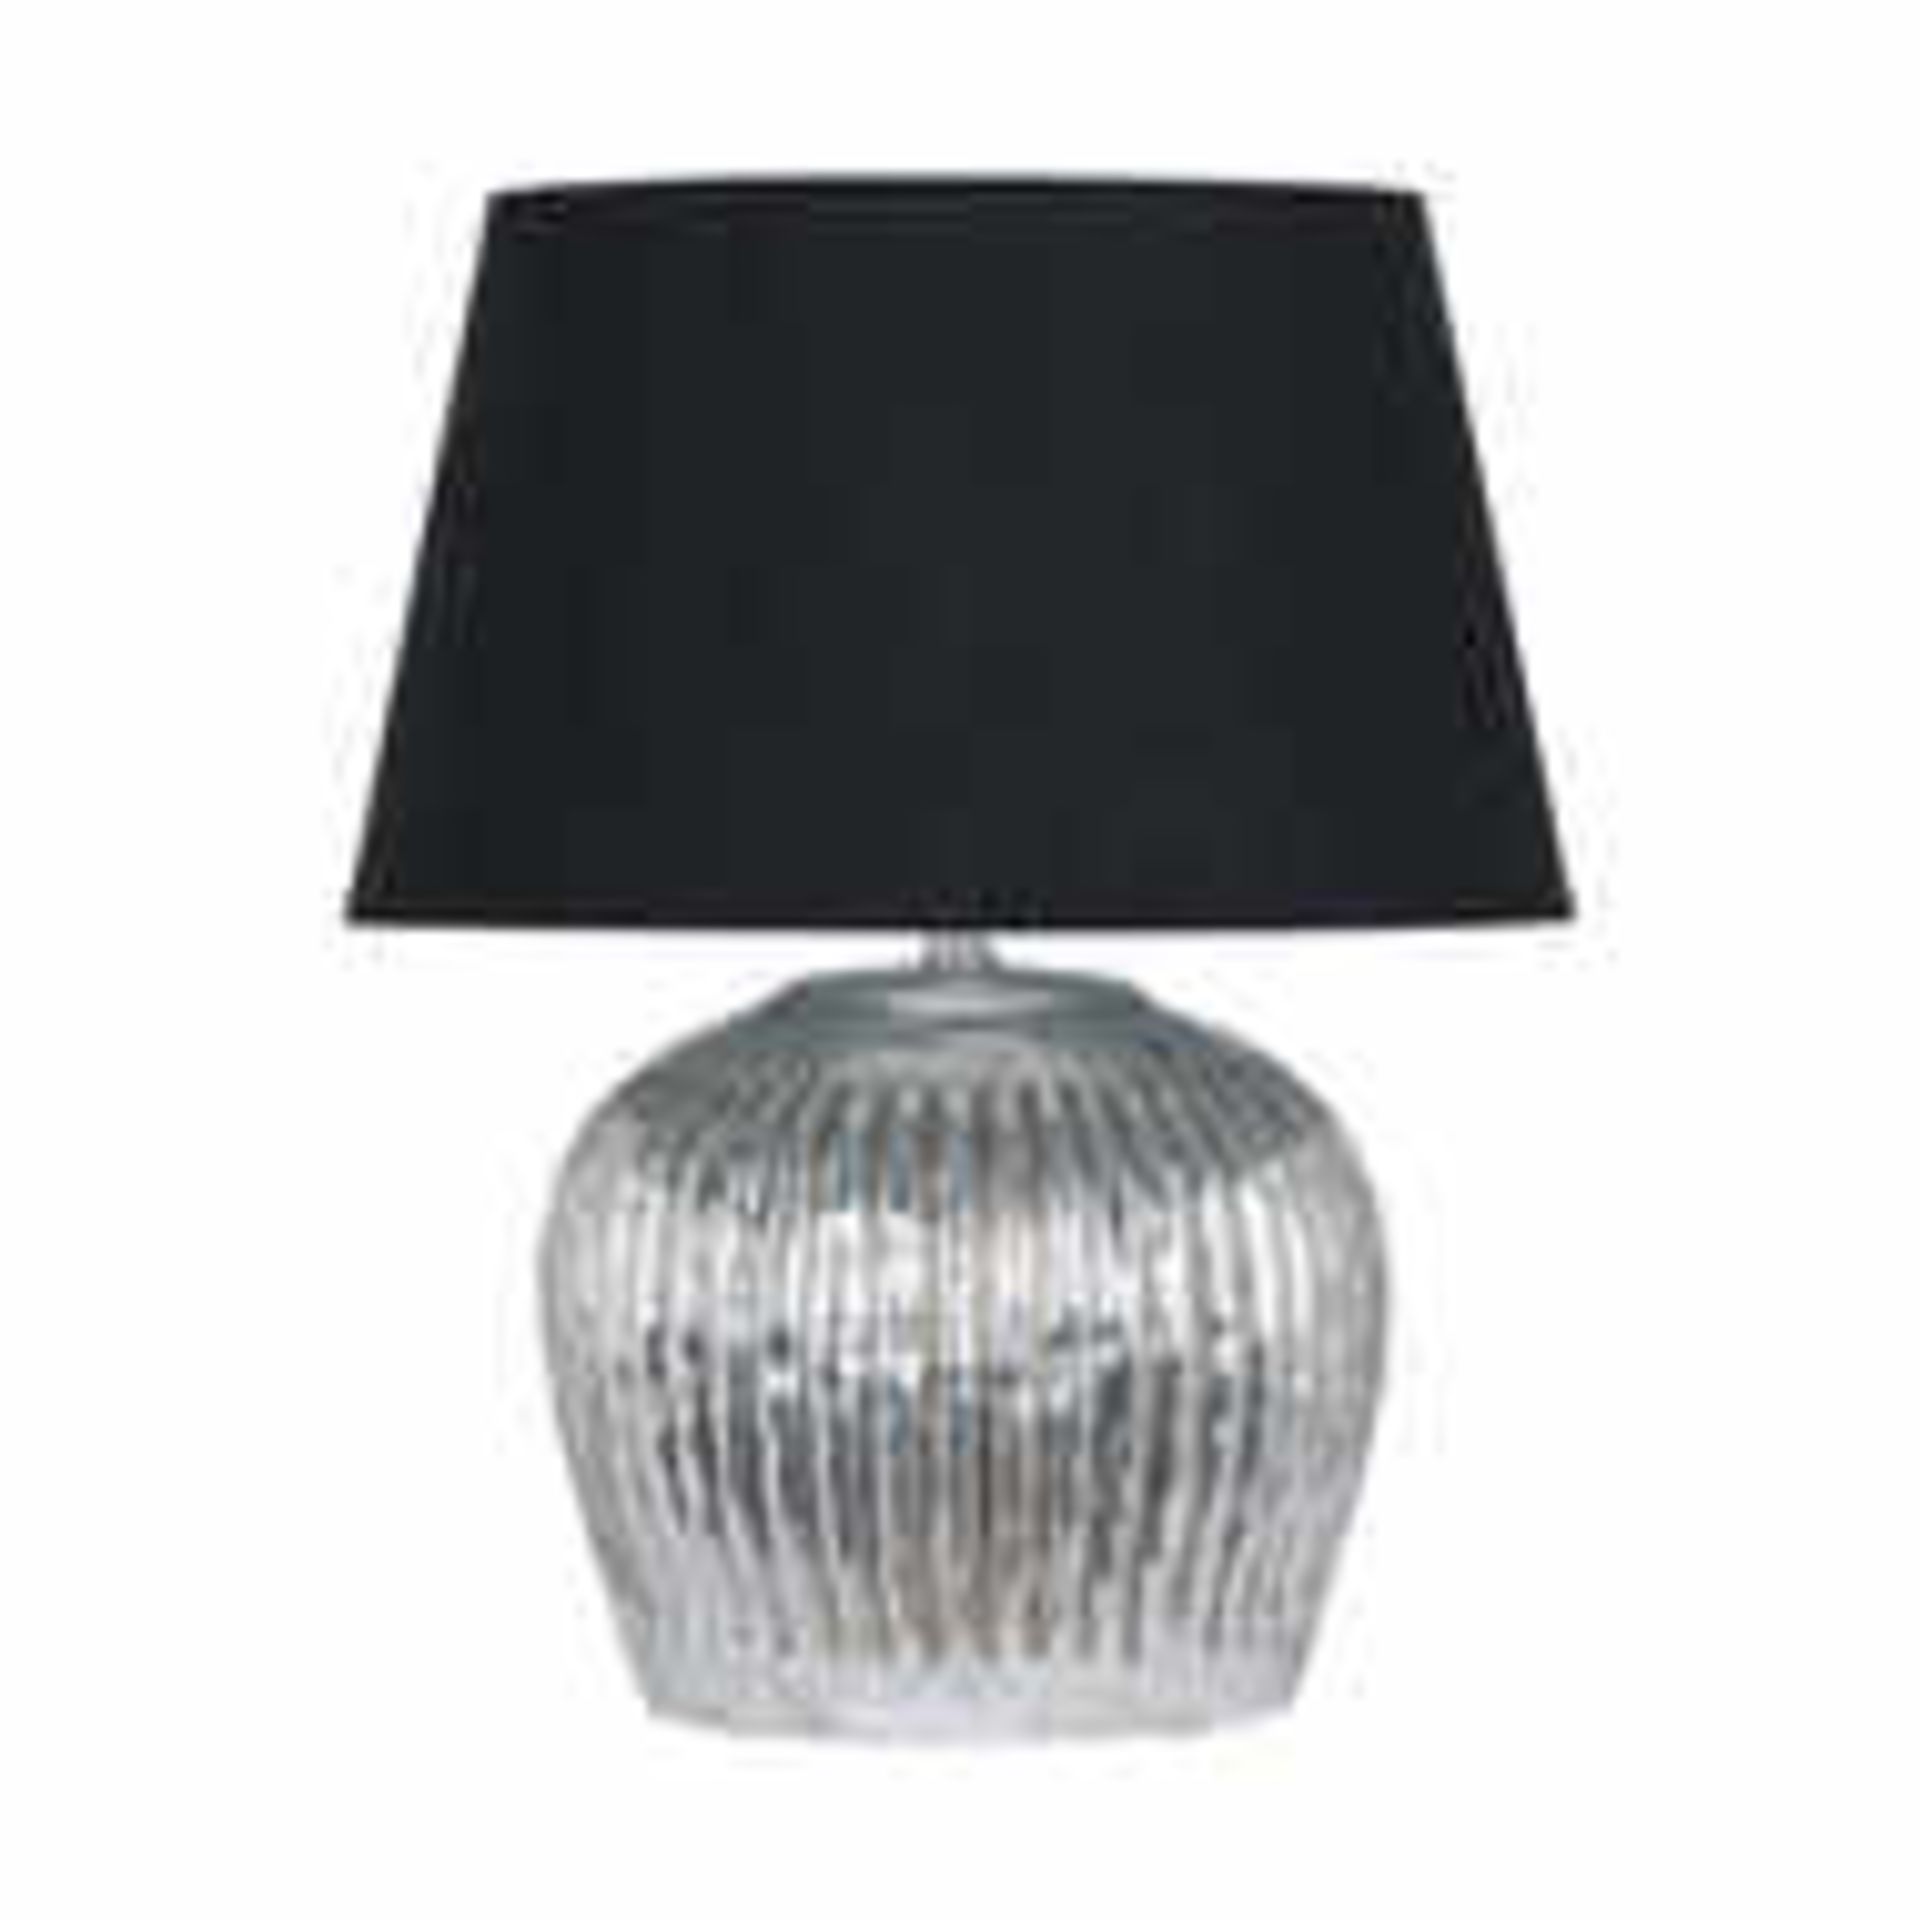 A Pair of Olivia Silver Ceramic Table Lamp Ceramic And Complemented By Its Elegant Shape And